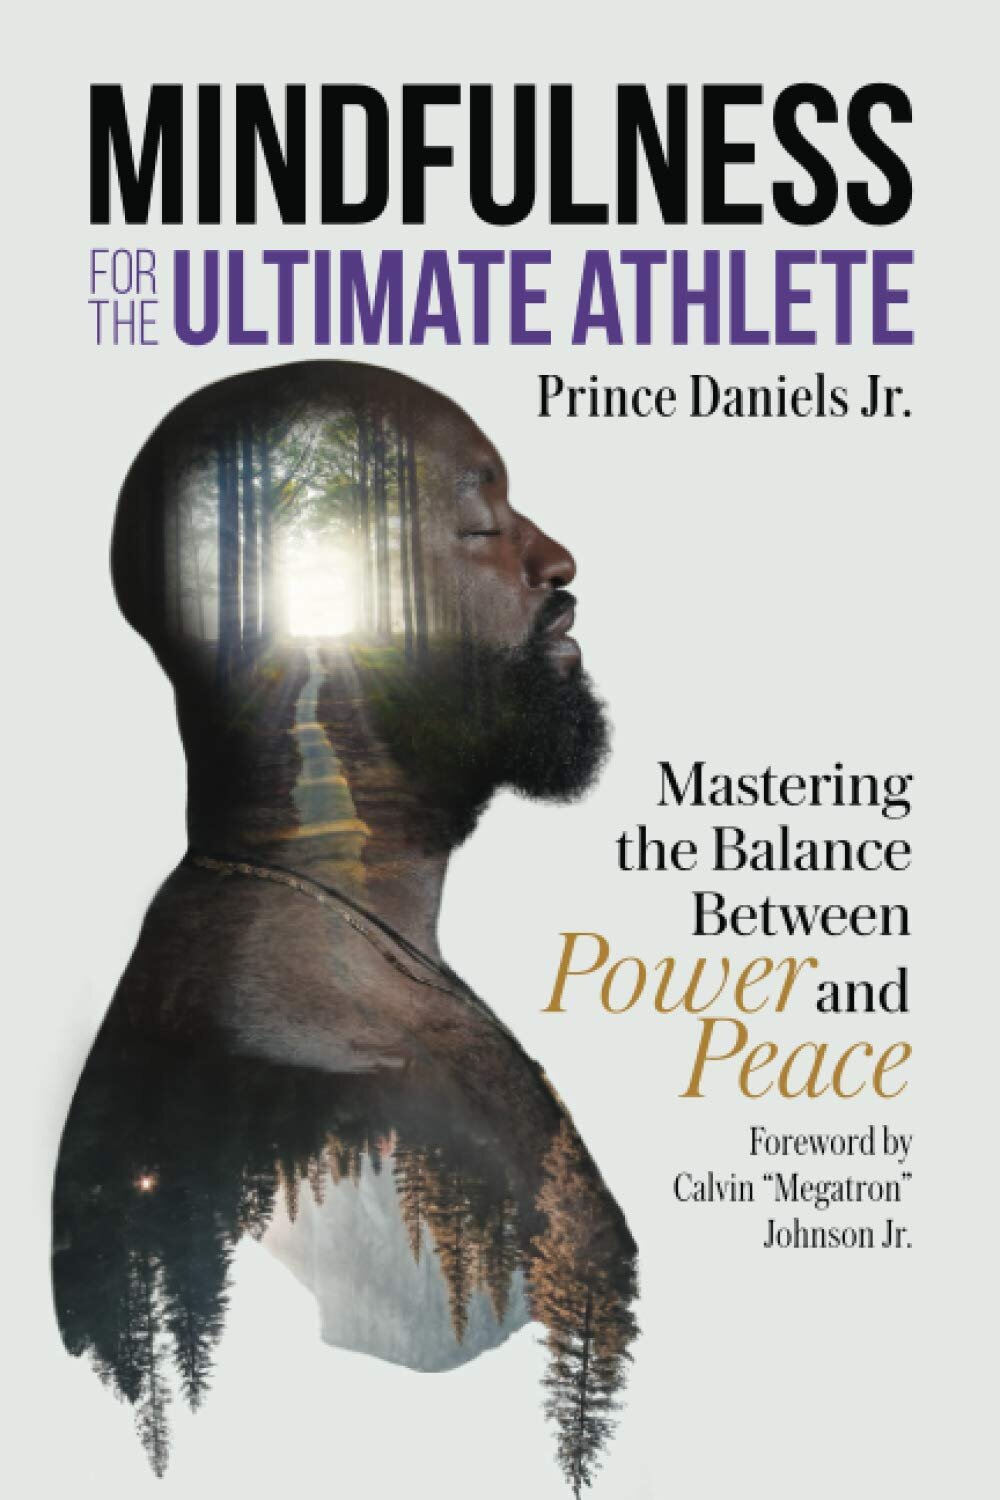 Mindfulness for the Ultimate Athlete: Mastering the Balance Between Power and Peace by Prince Daniels Jr.